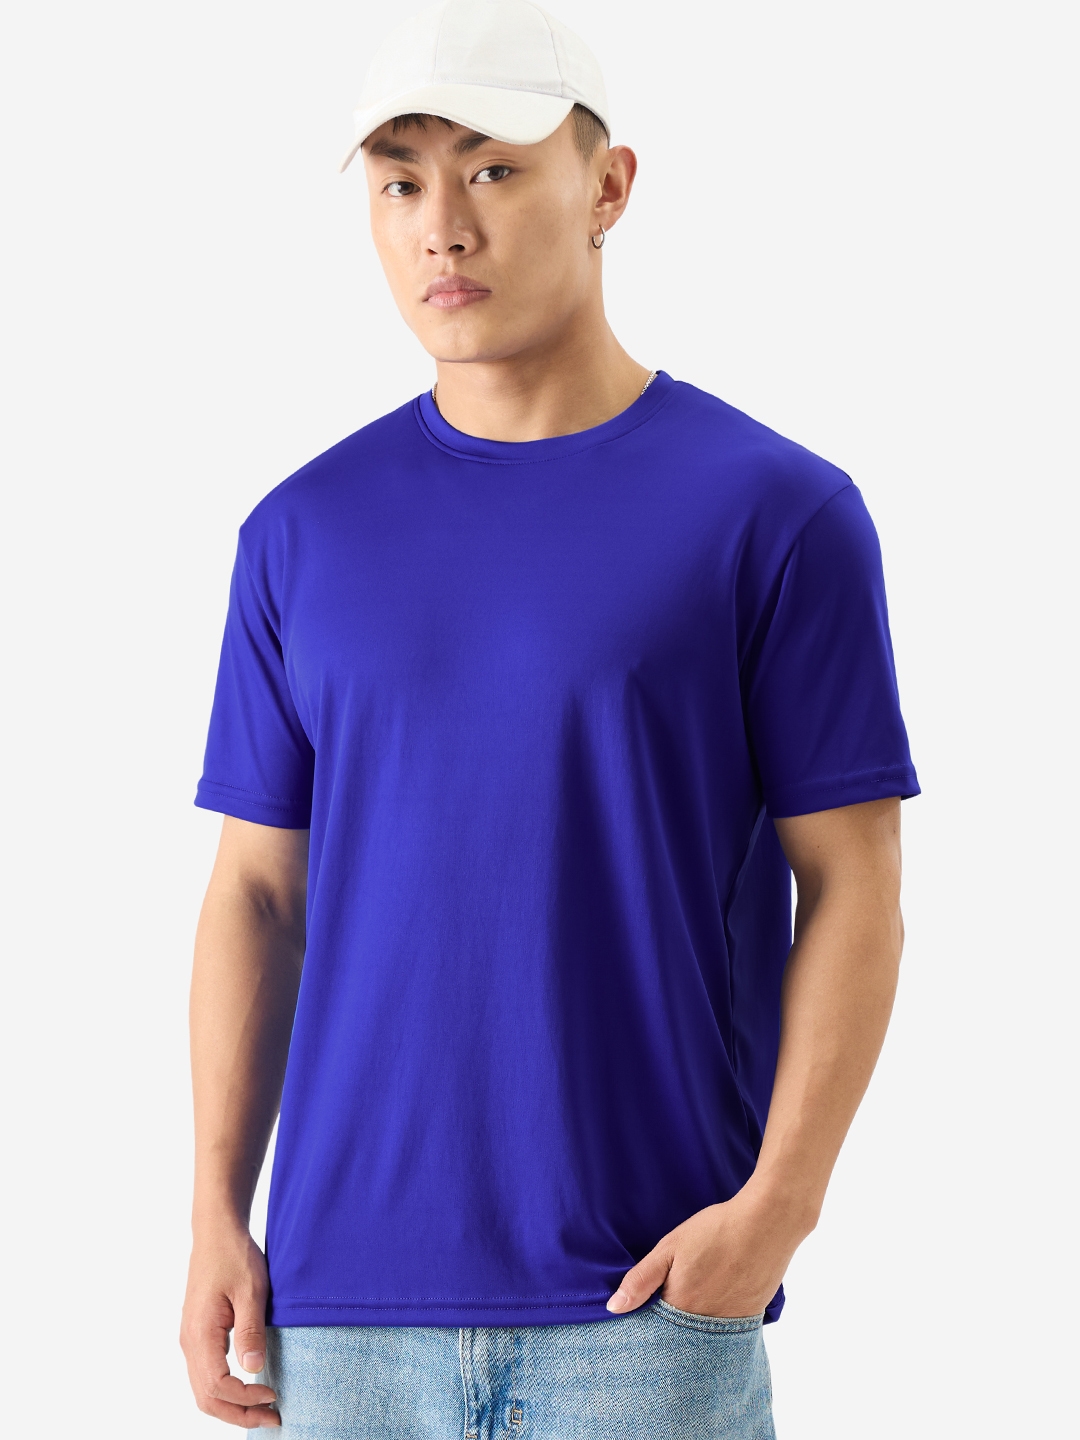 The Souled Store | Men's Solids: Bang Blue T-Shirts